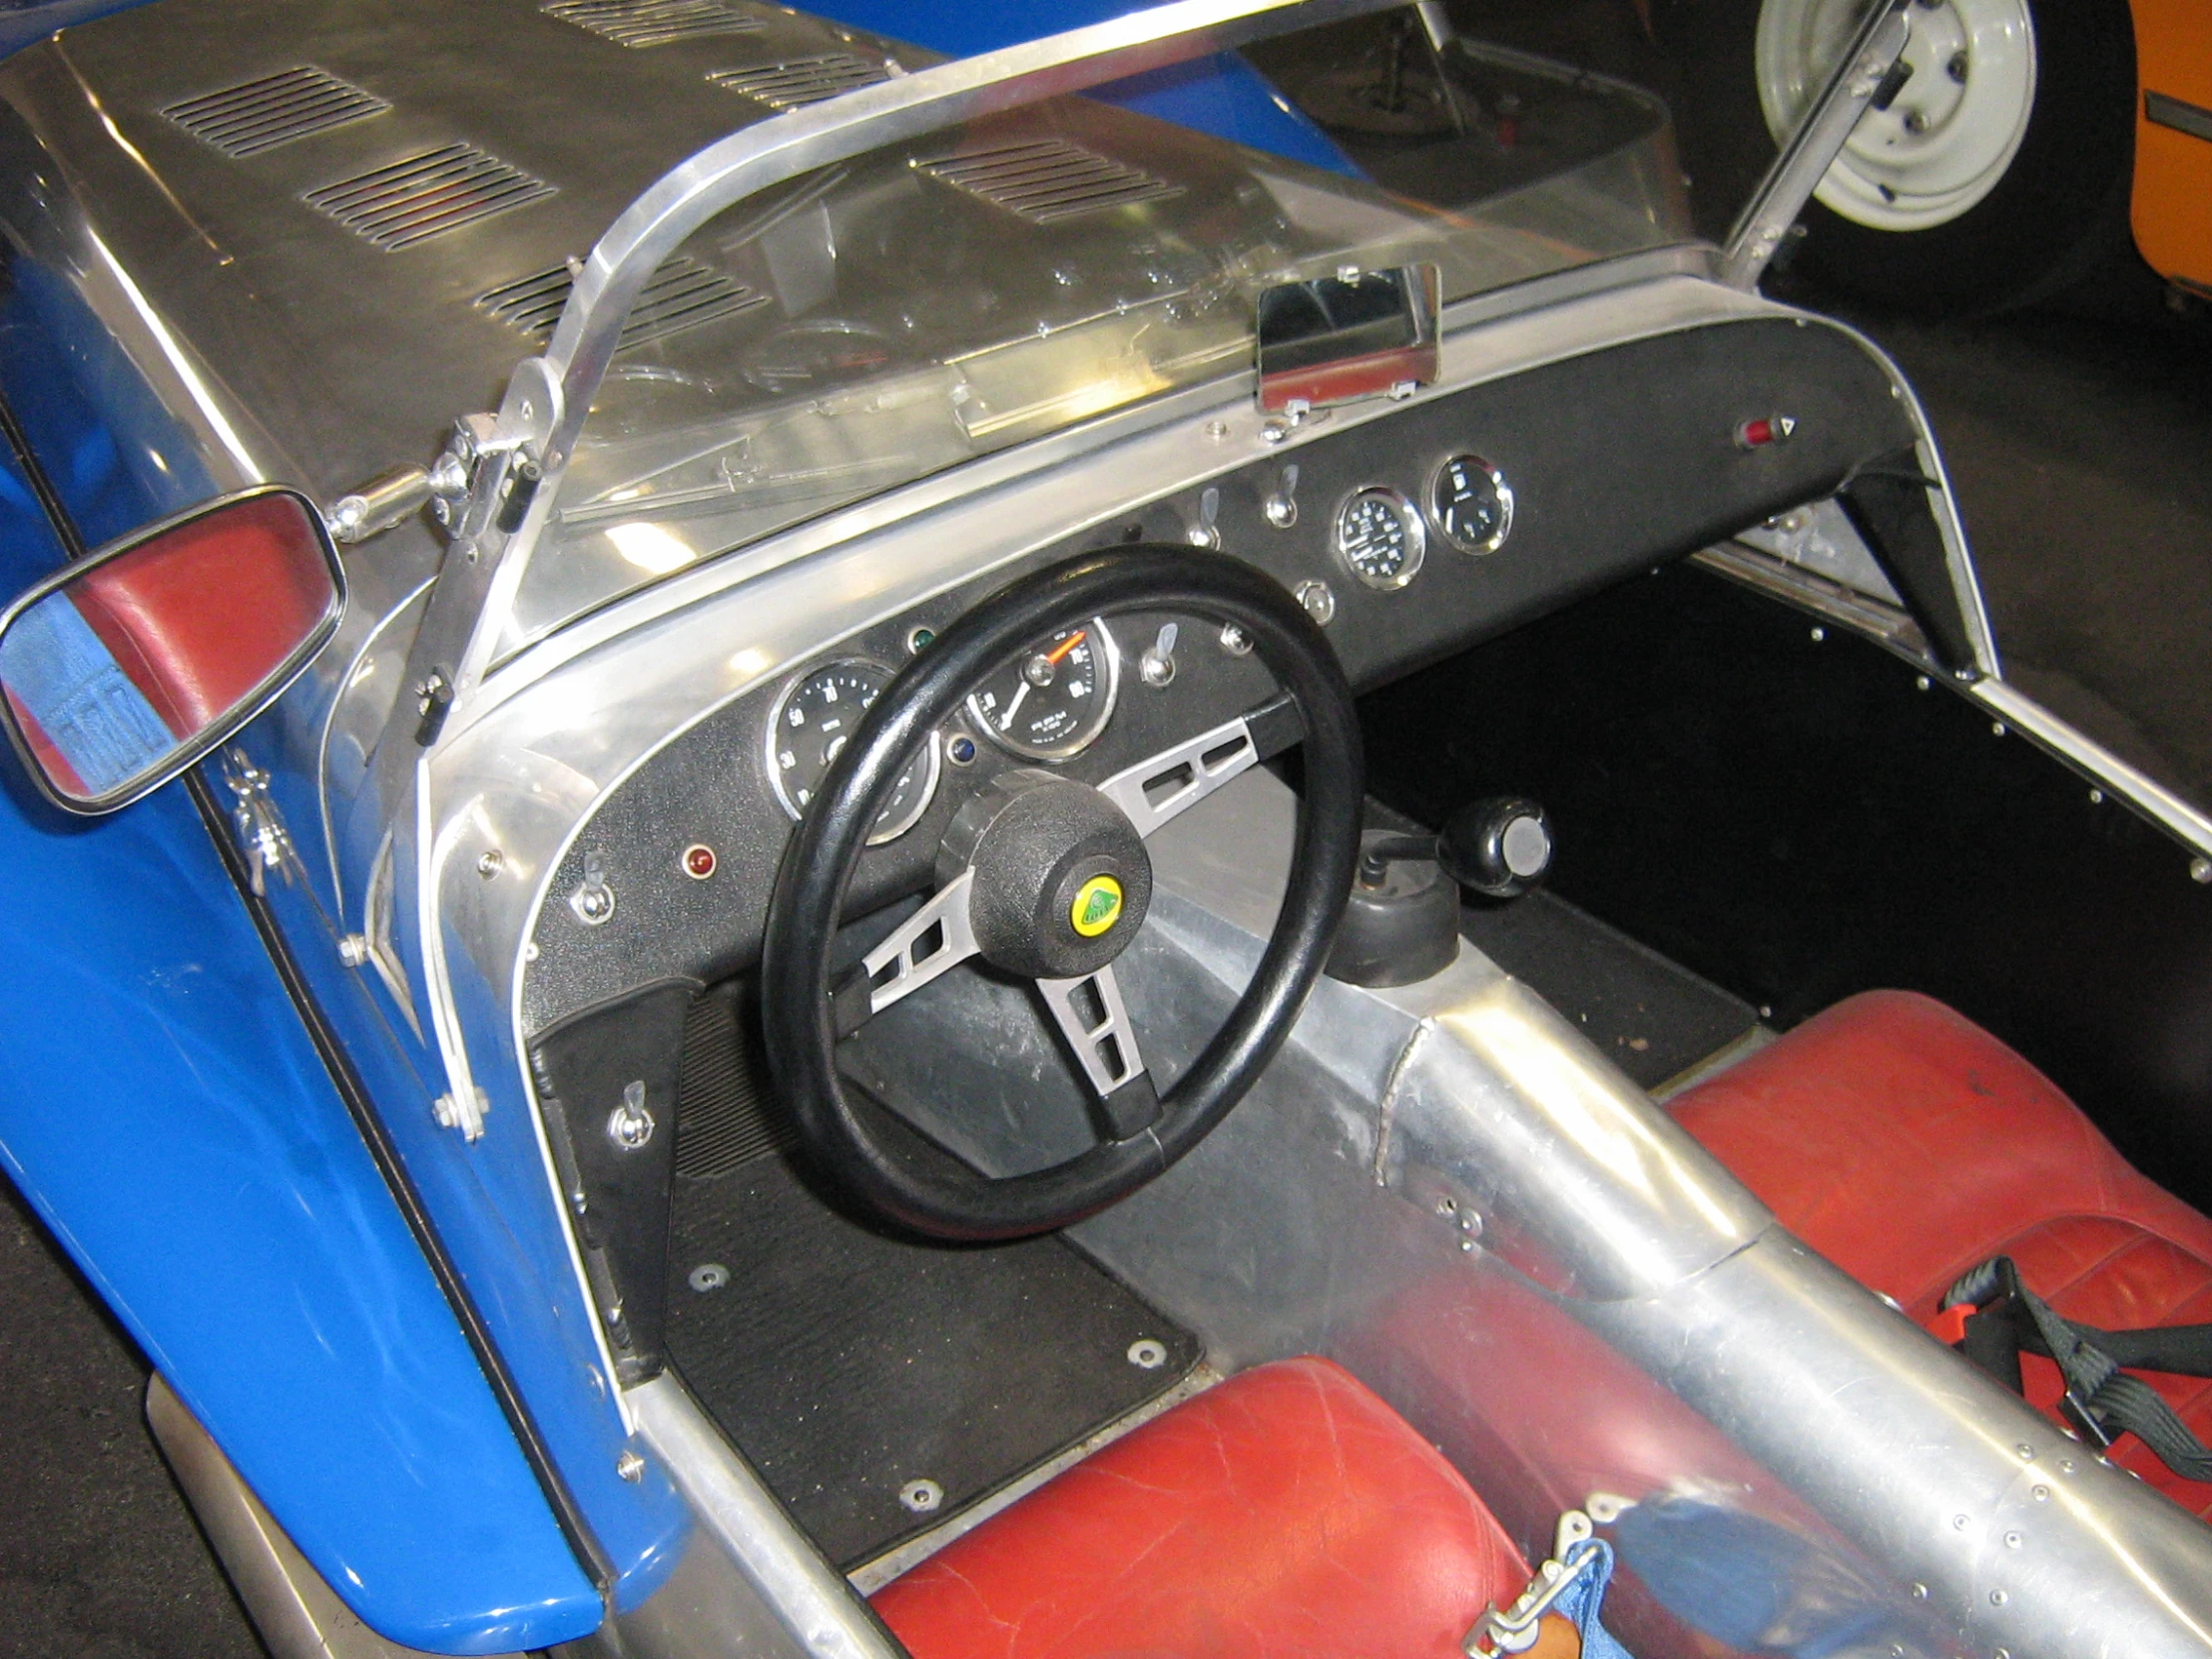 the interior of a vehicle that's for display in a shop